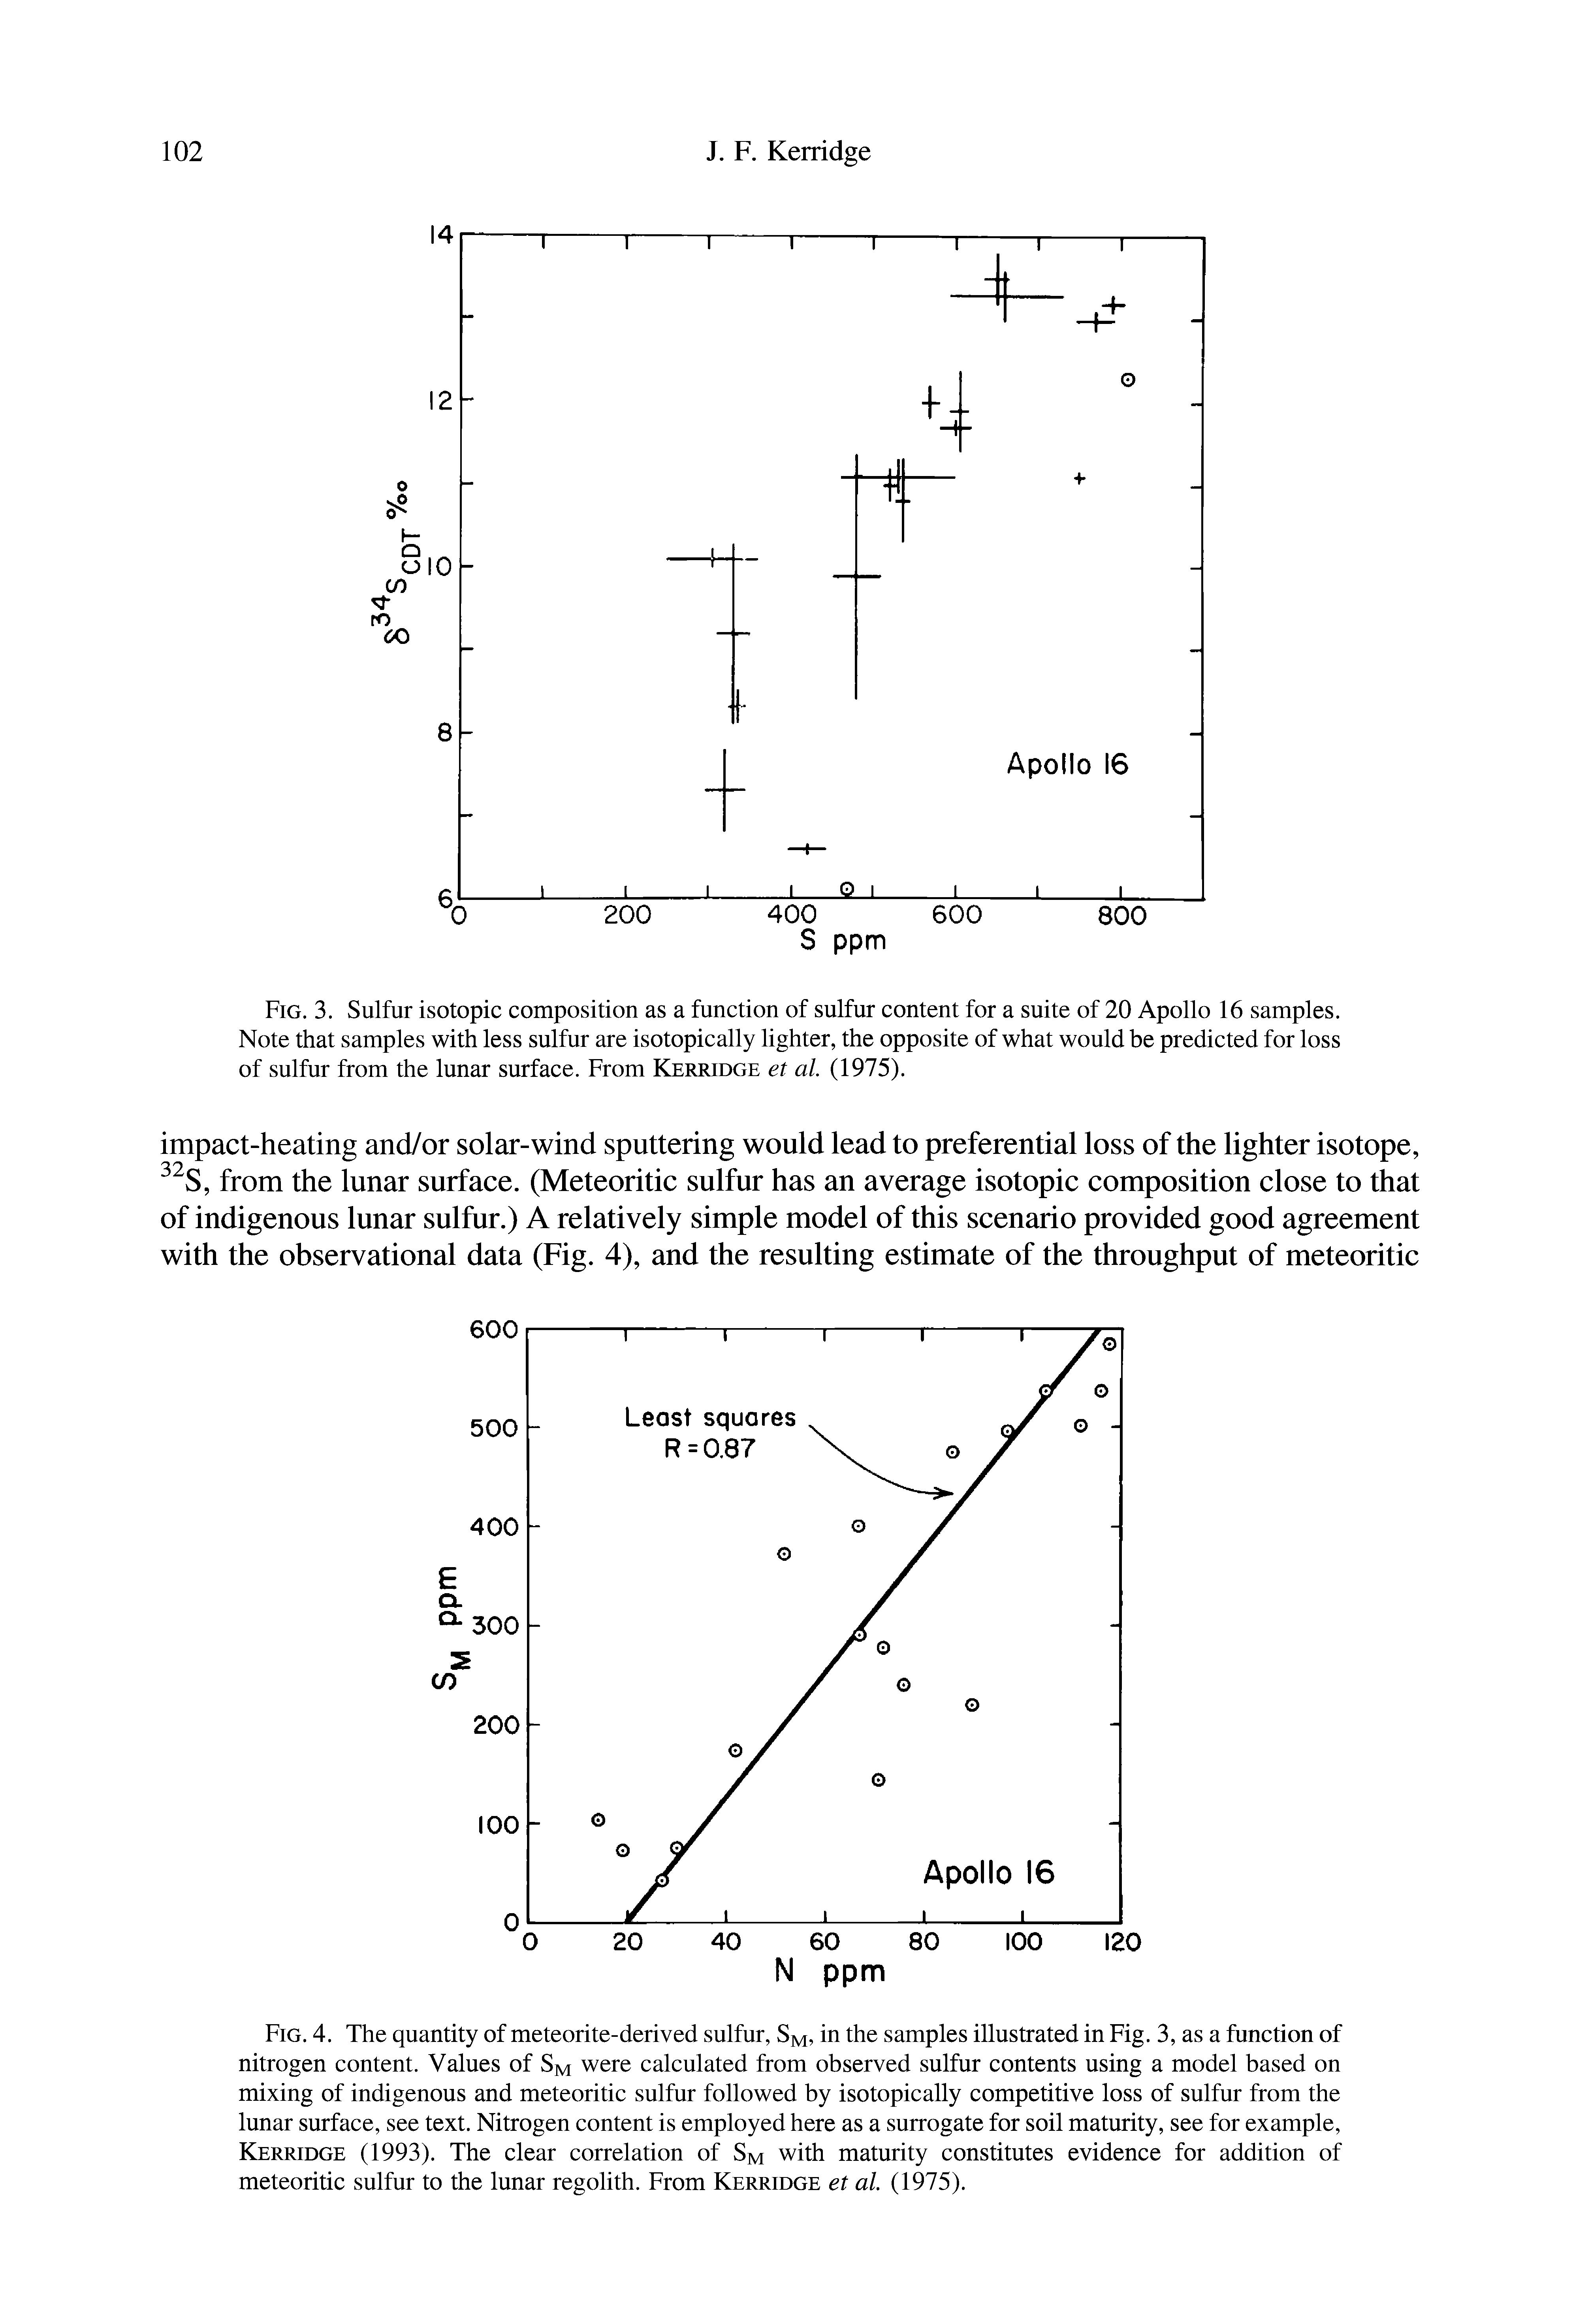 Fig. 4. The quantity of meteorite-derived sulfur, Sm, in the samples illustrated in Fig. 3, as a function of nitrogen content. Values of Sm were calculated from observed sulfur contents using a model based on mixing of indigenous and meteoritic sulfur followed by isotopically competitive loss of sulfur from the lunar surface, see text. Nitrogen content is employed here as a surrogate for soil maturity, see for example, Kerridge (1993). The clear correlation of Sm with maturity constitutes evidence for addition of meteoritic sulfur to the lunar regolith. From Kerridge et al (1975).